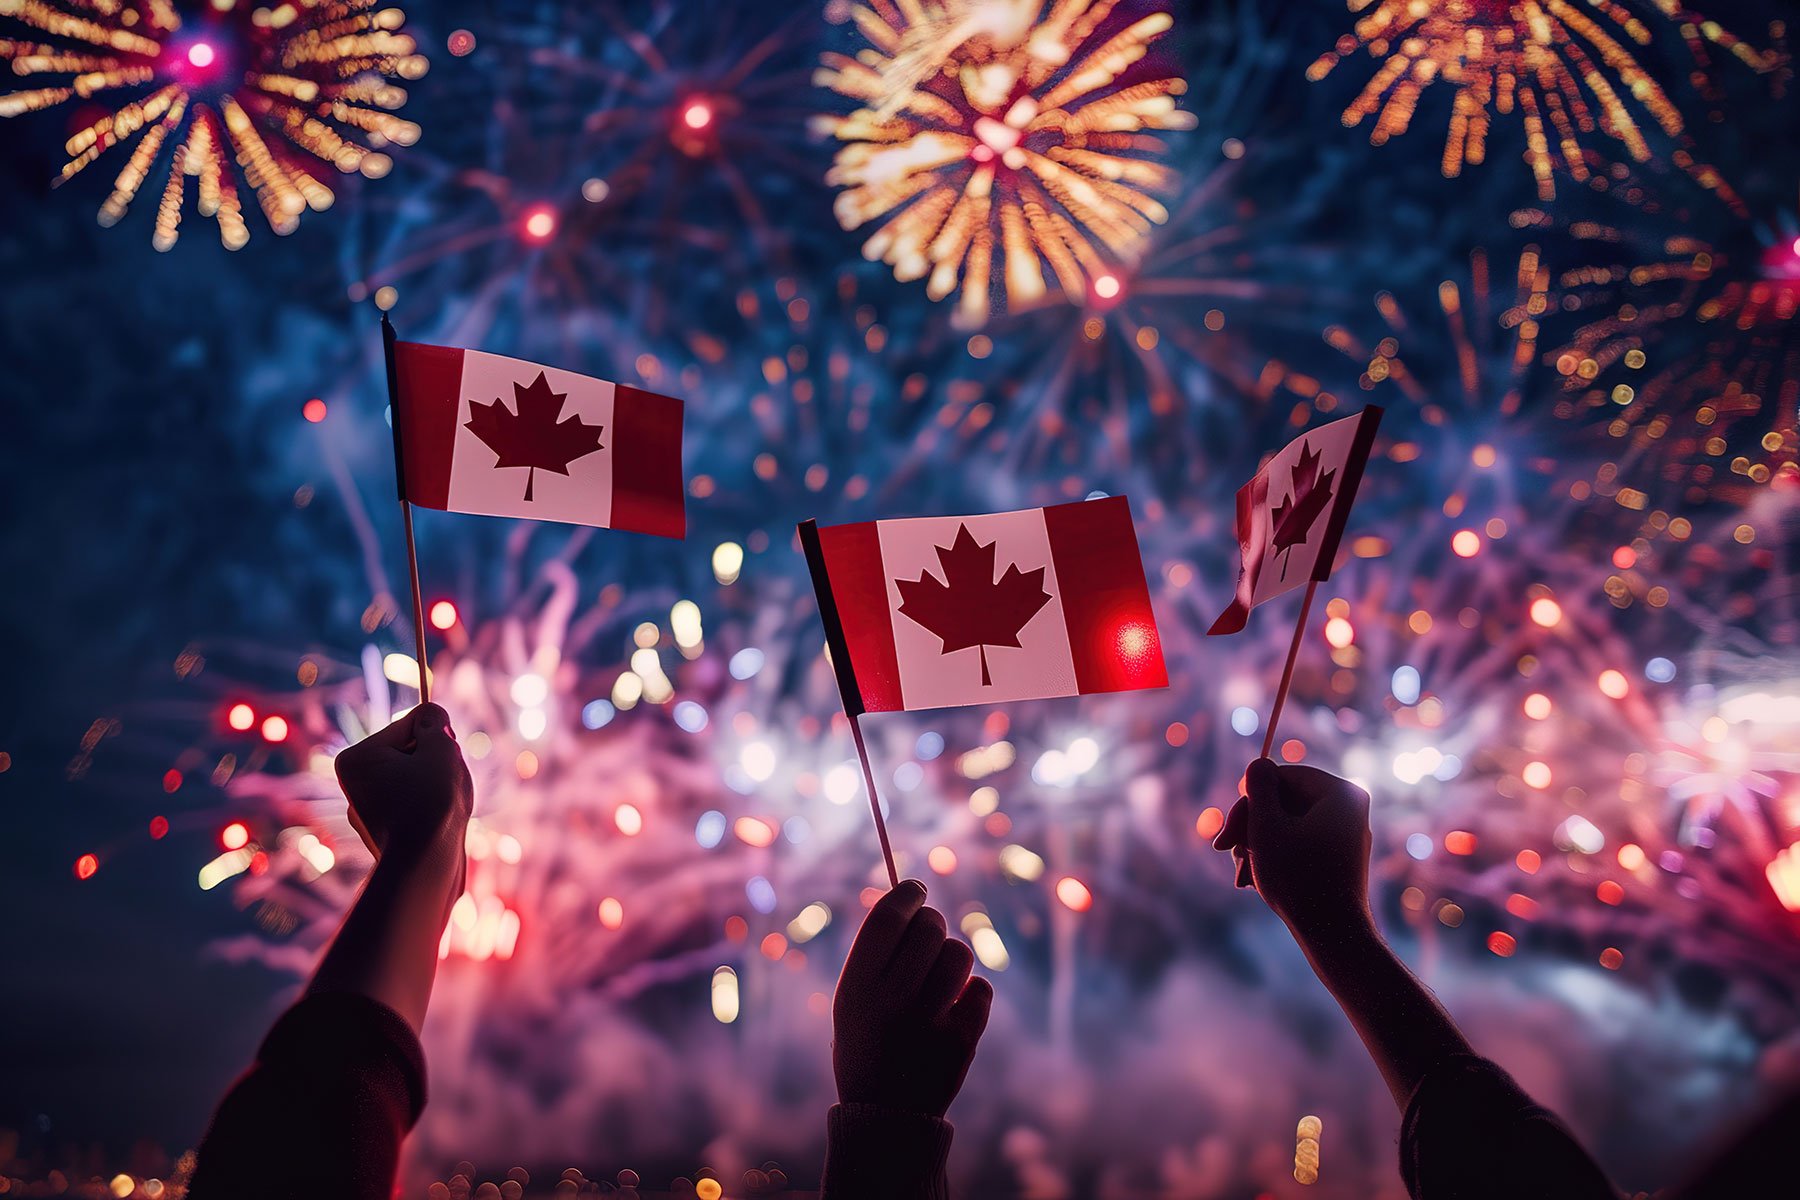 Crowd watching fireworks with three people holding Canada flags in front of them